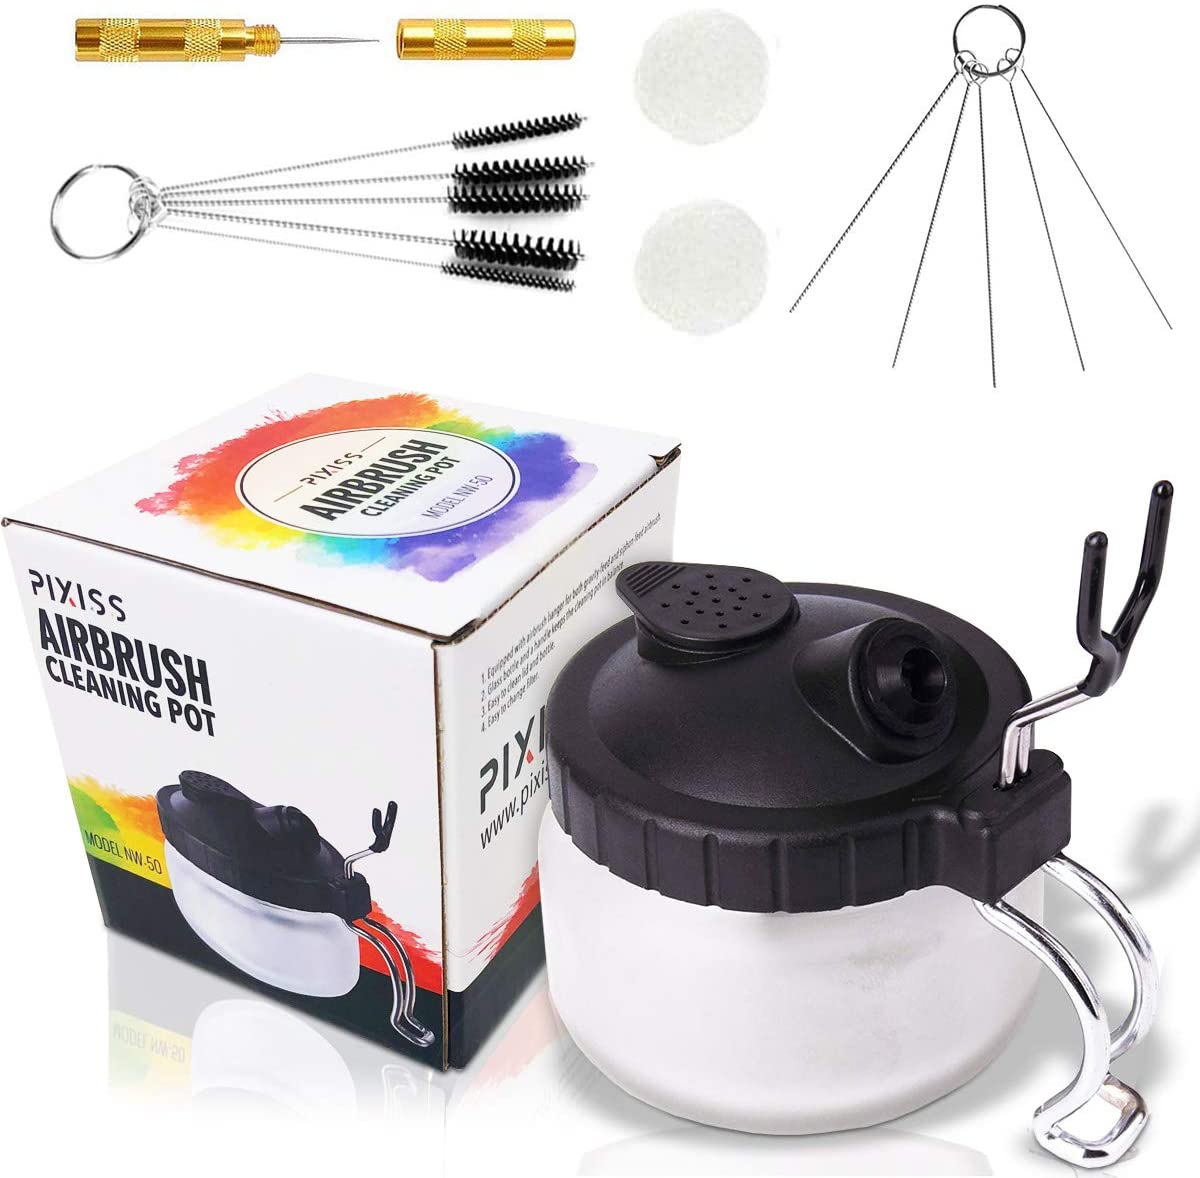 Pixiss Airbrush Cleaning Kit — Grand River Art Supply